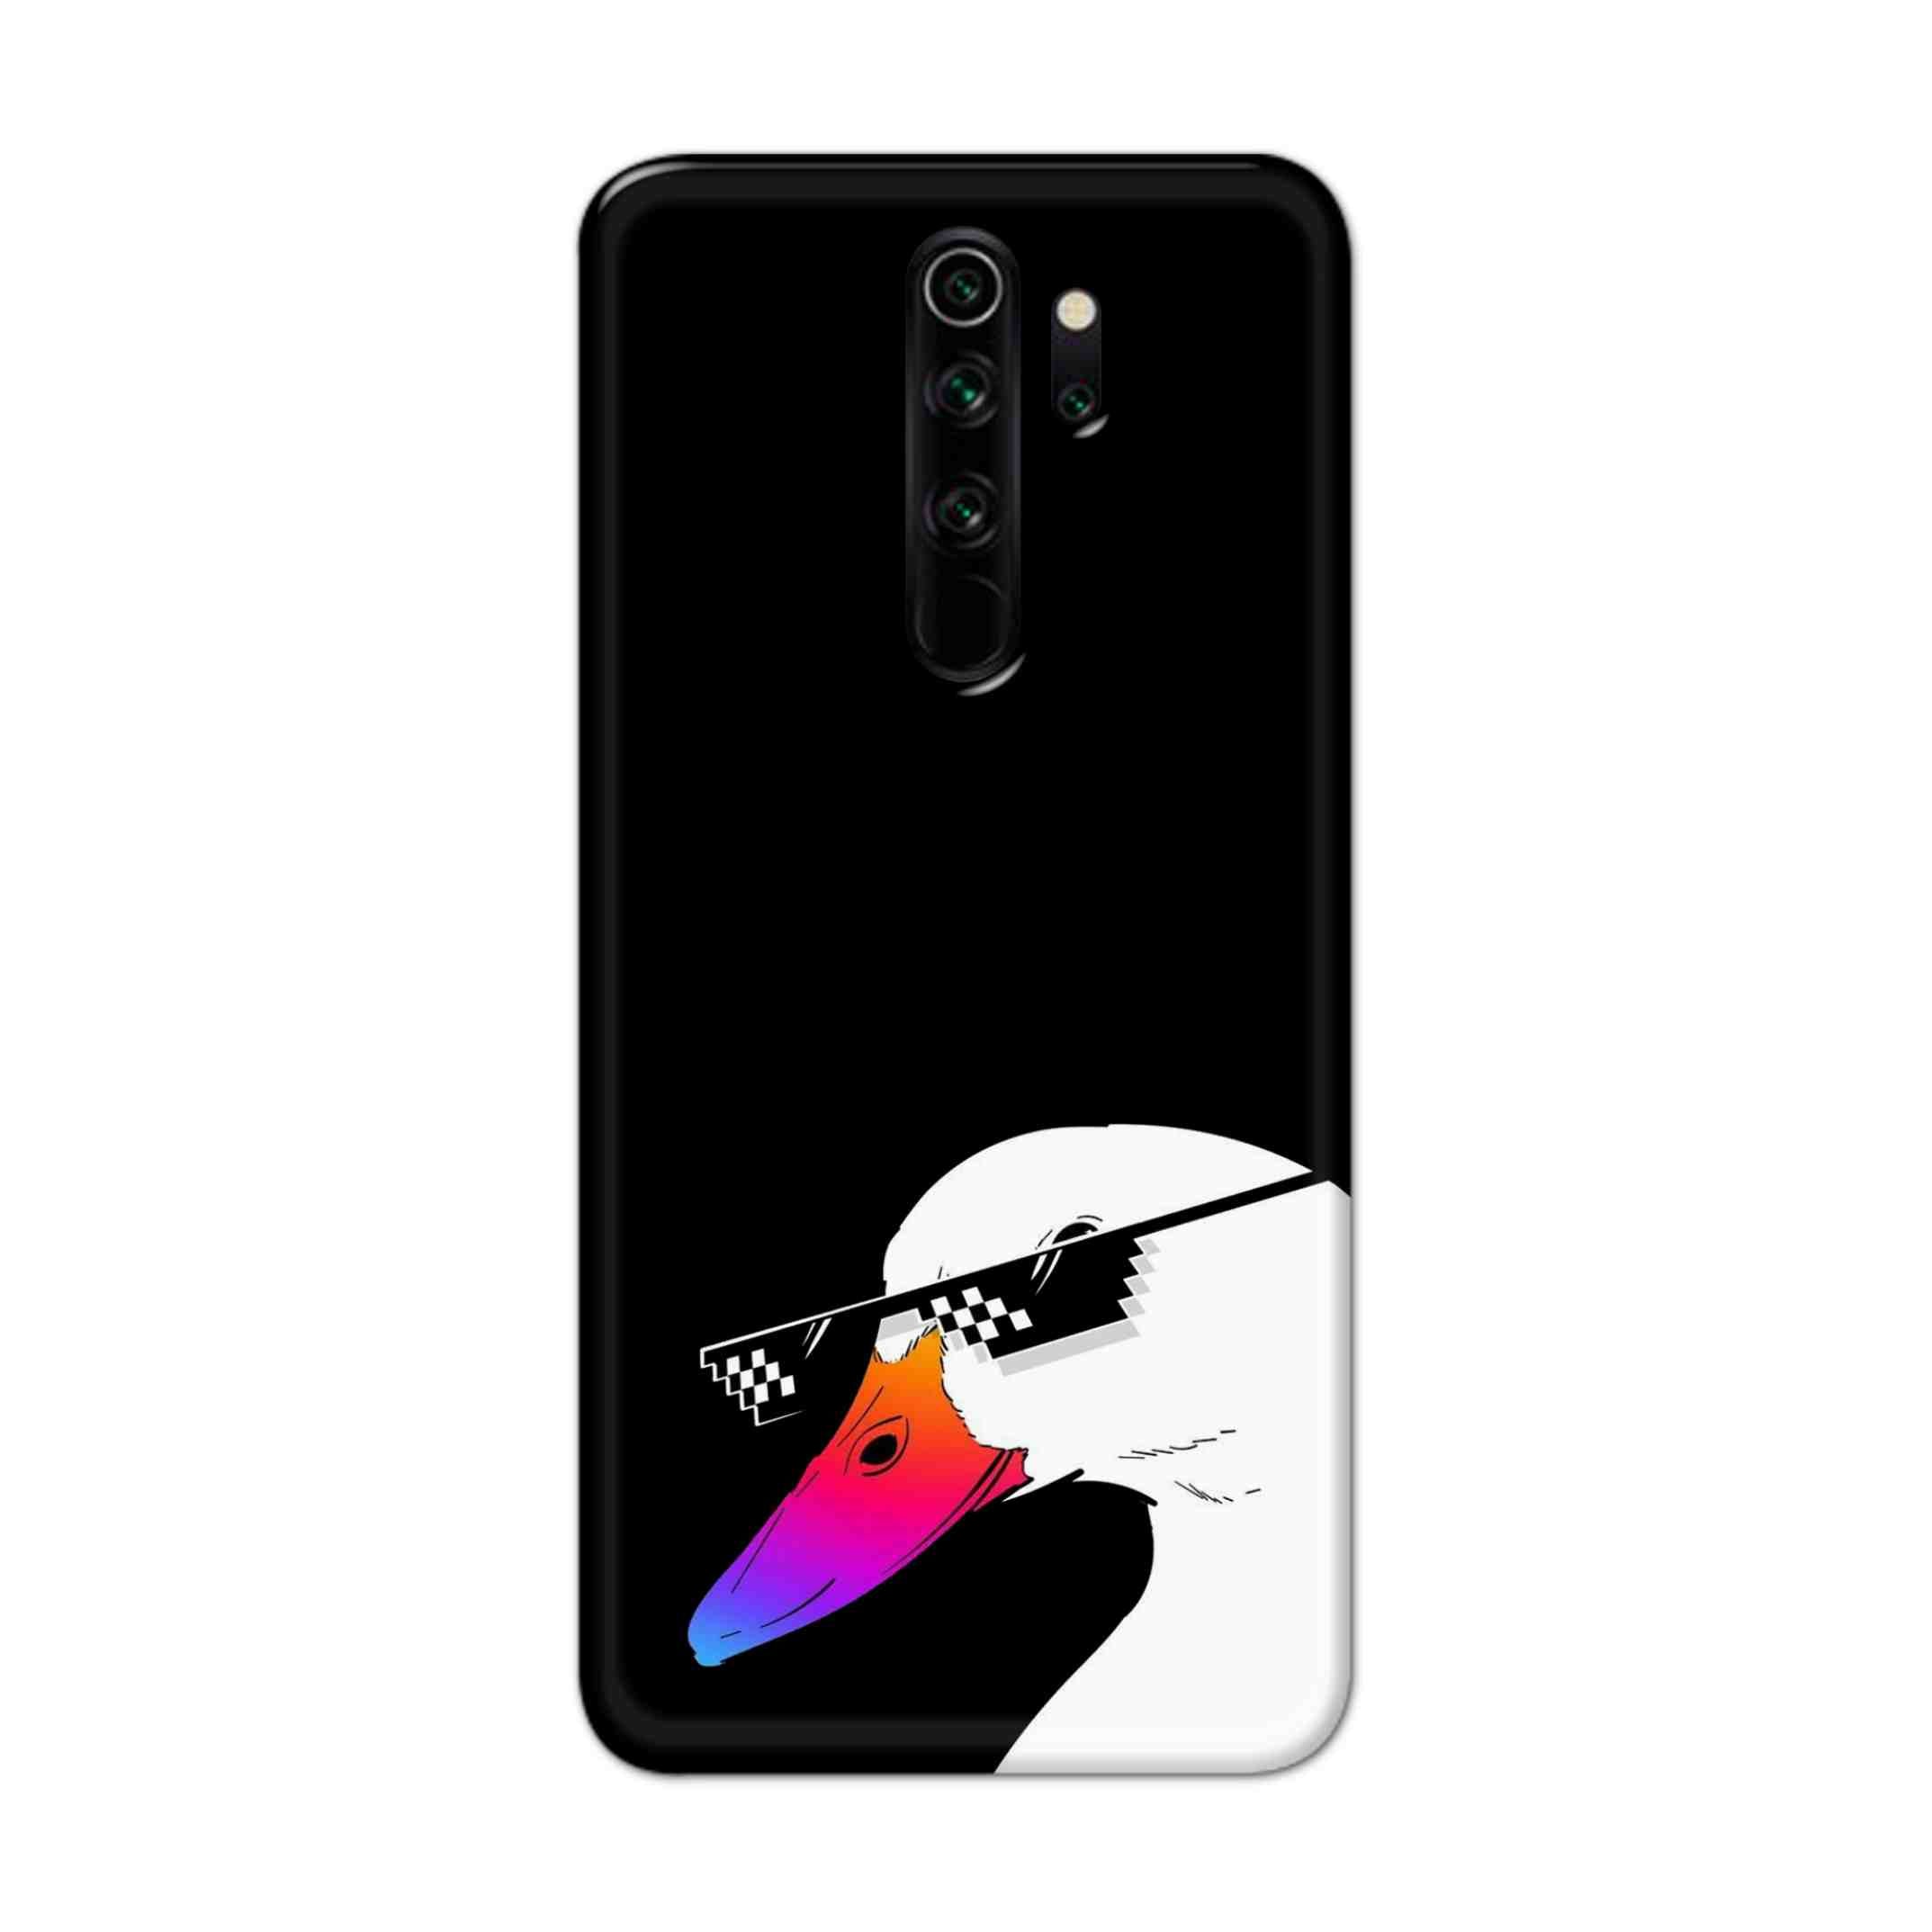 Buy Neon Duck Hard Back Mobile Phone Case Cover For Xiaomi Redmi Note 8 Pro Online